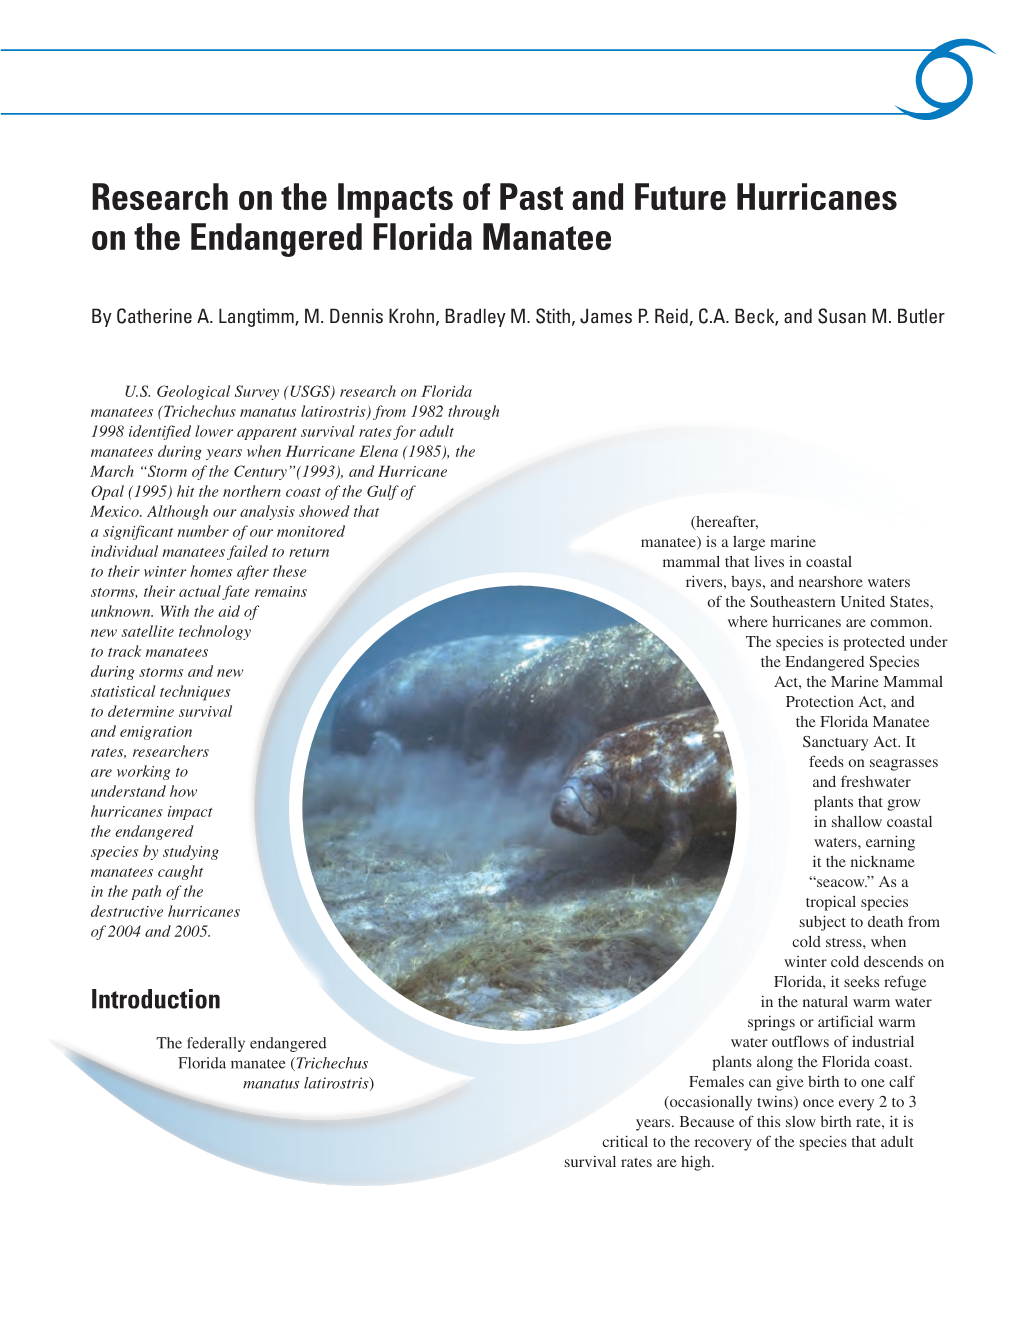 Research on the Impacts of Past and Future Hurricanes on the Endangered Florida Manatee